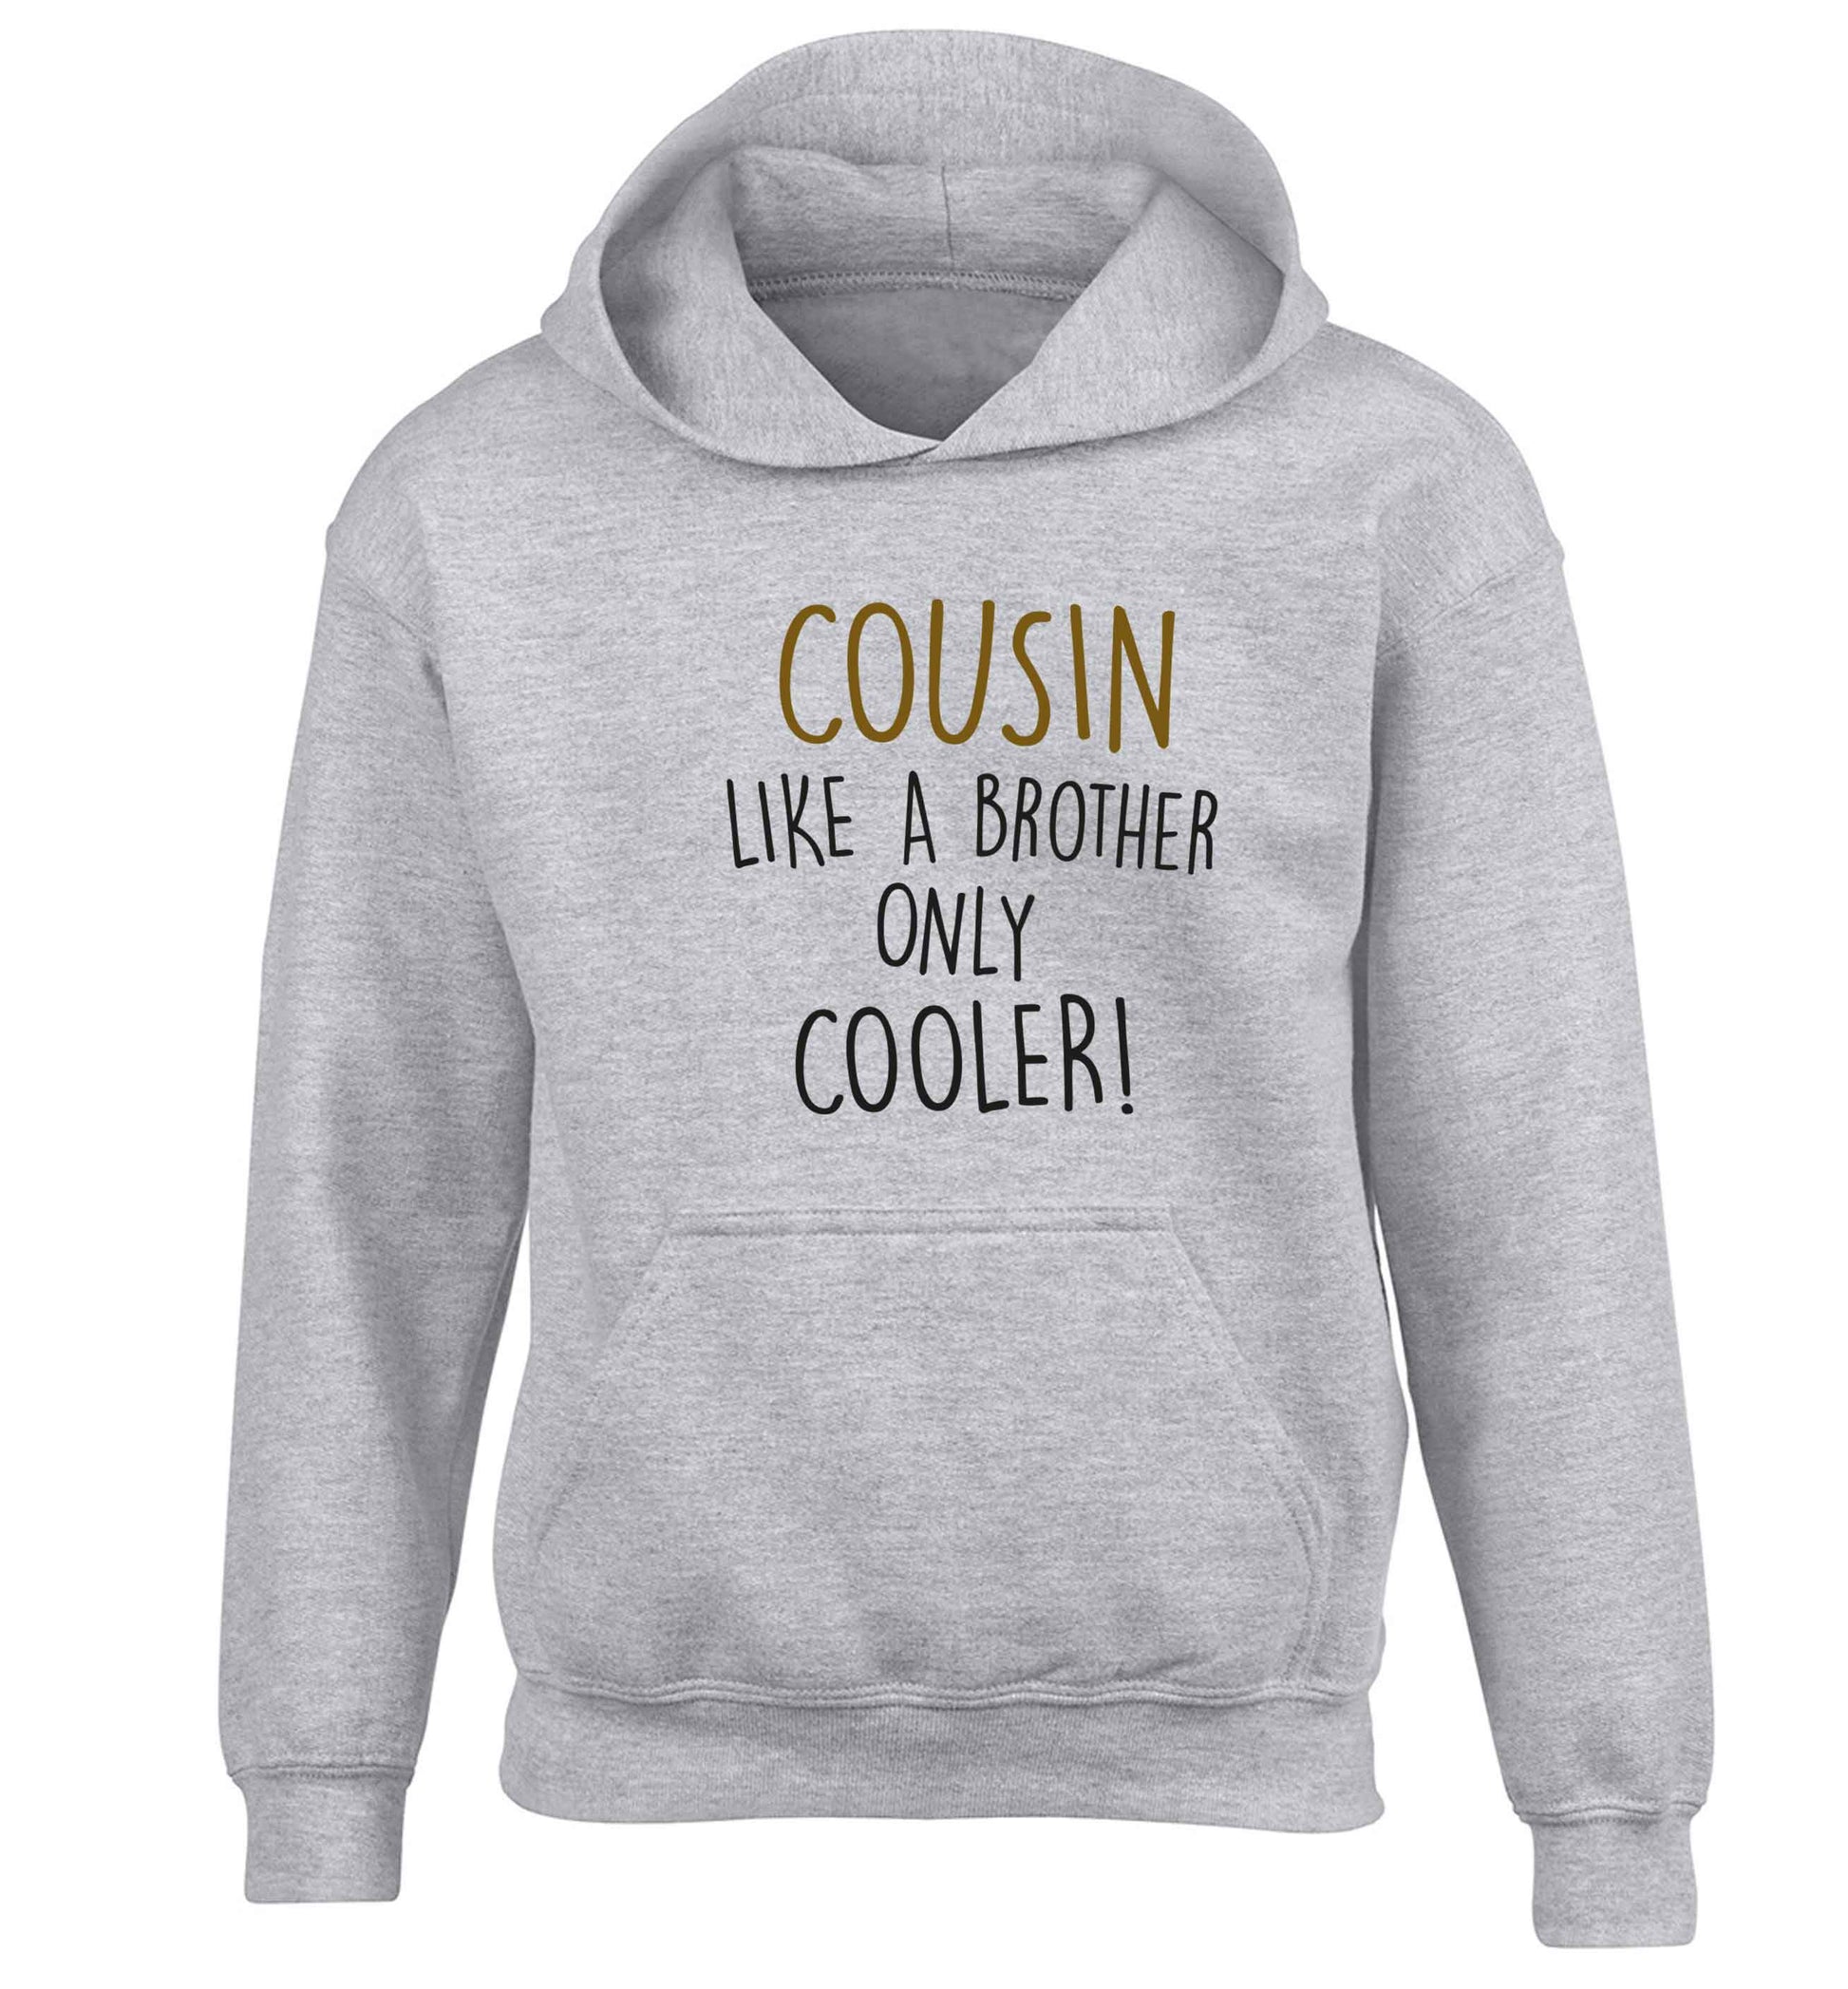 Cousin like a brother only cooler children's grey hoodie 12-13 Years